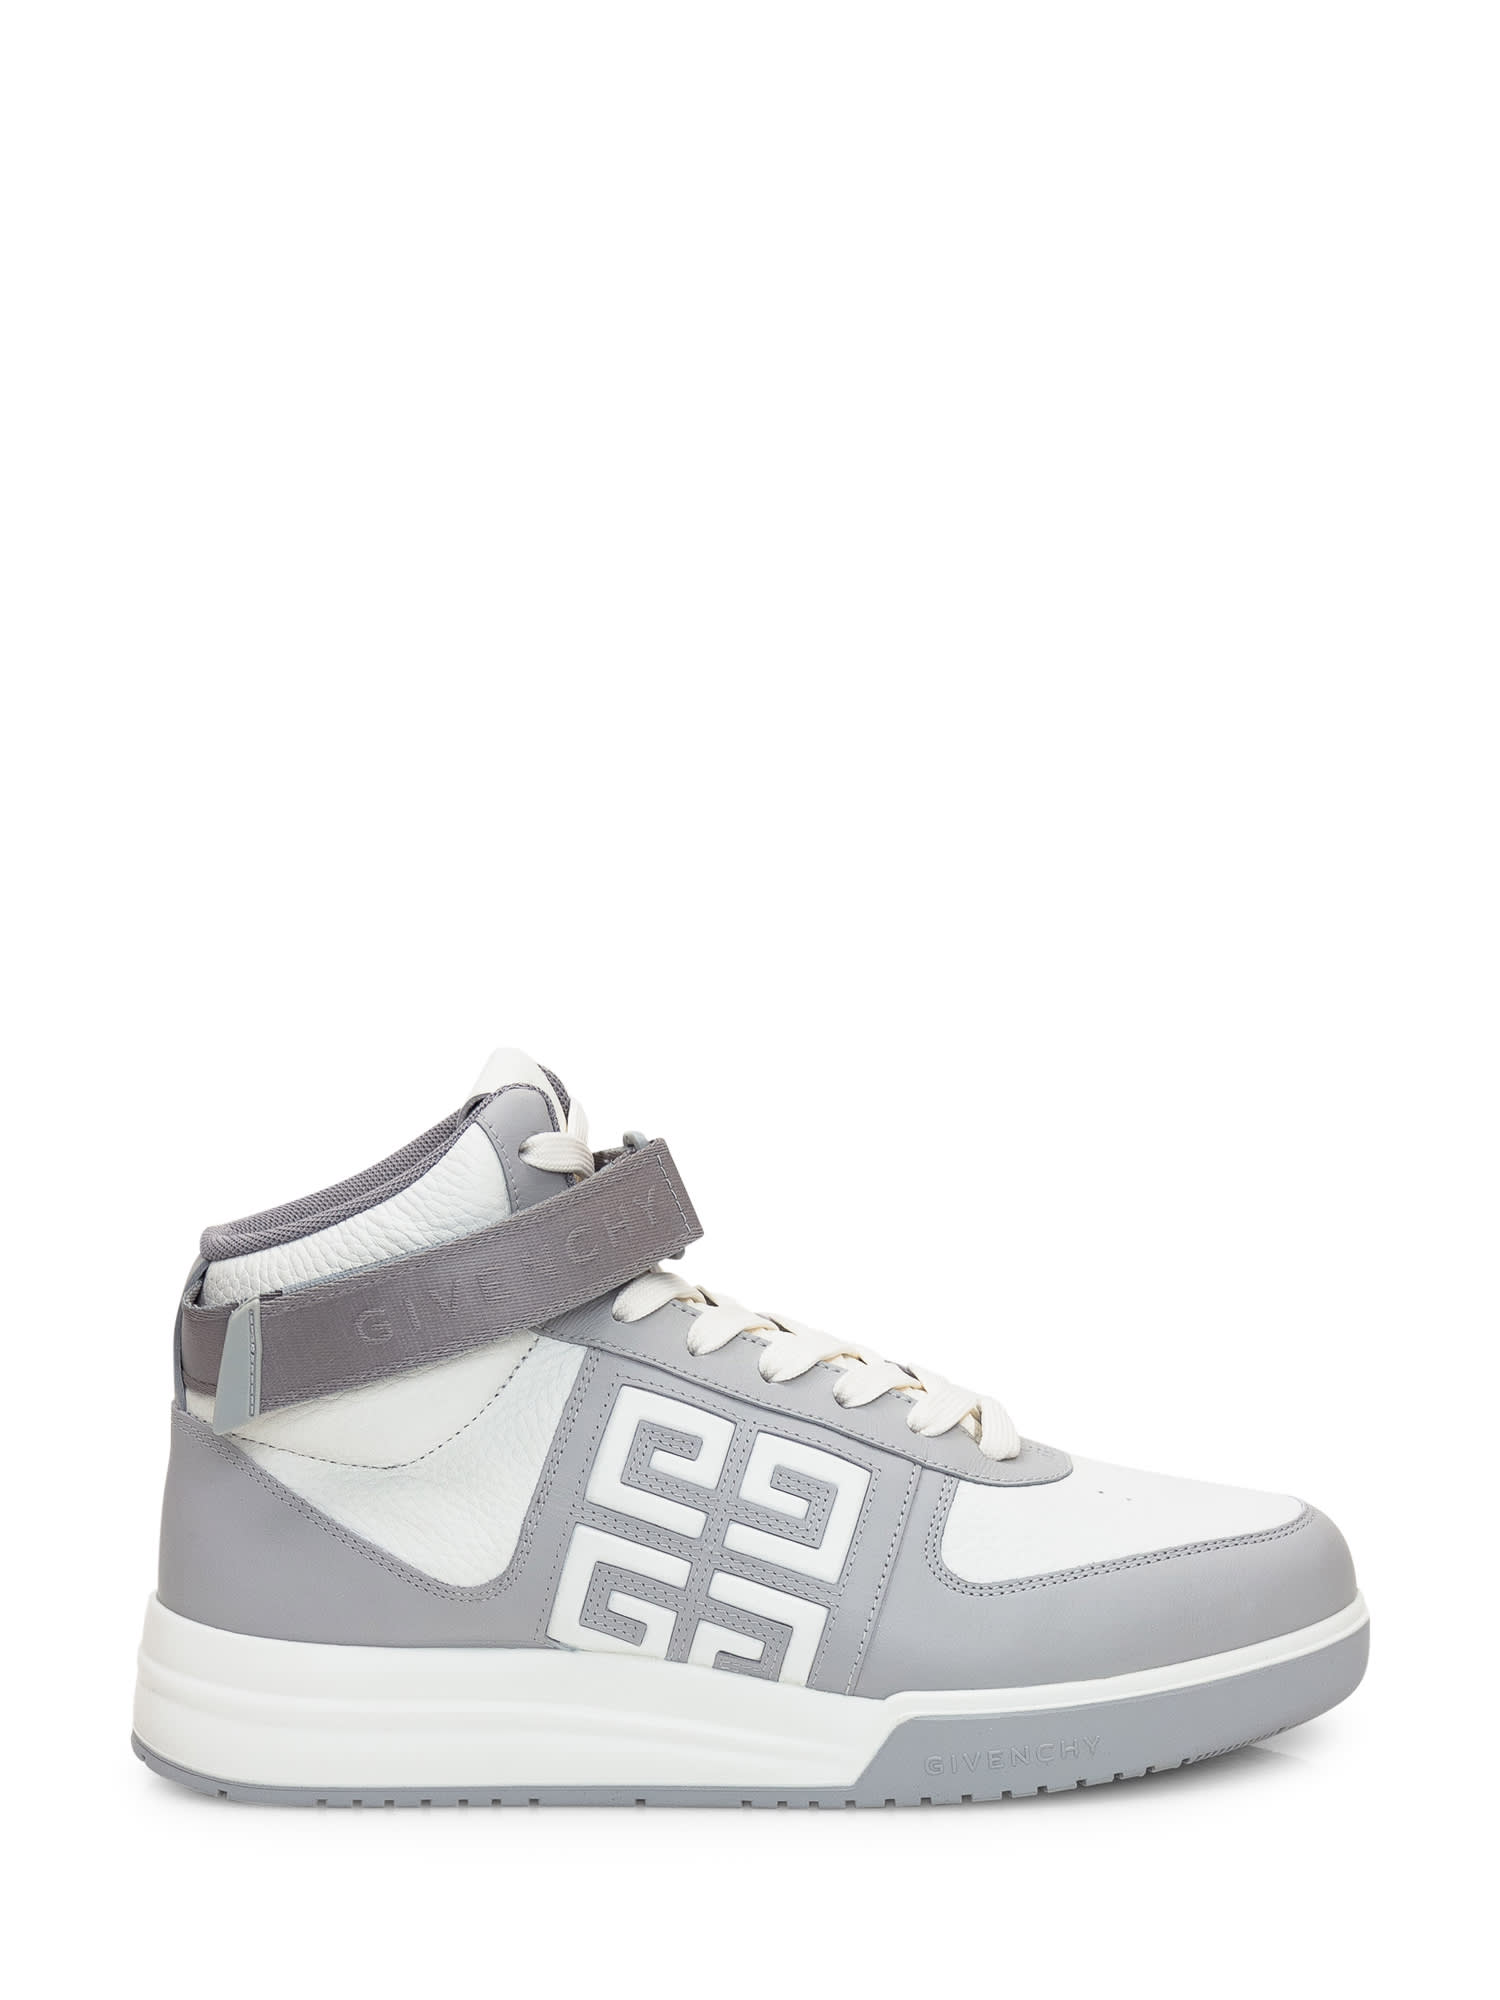 Shop Givenchy G4 High Sneaker In Grey